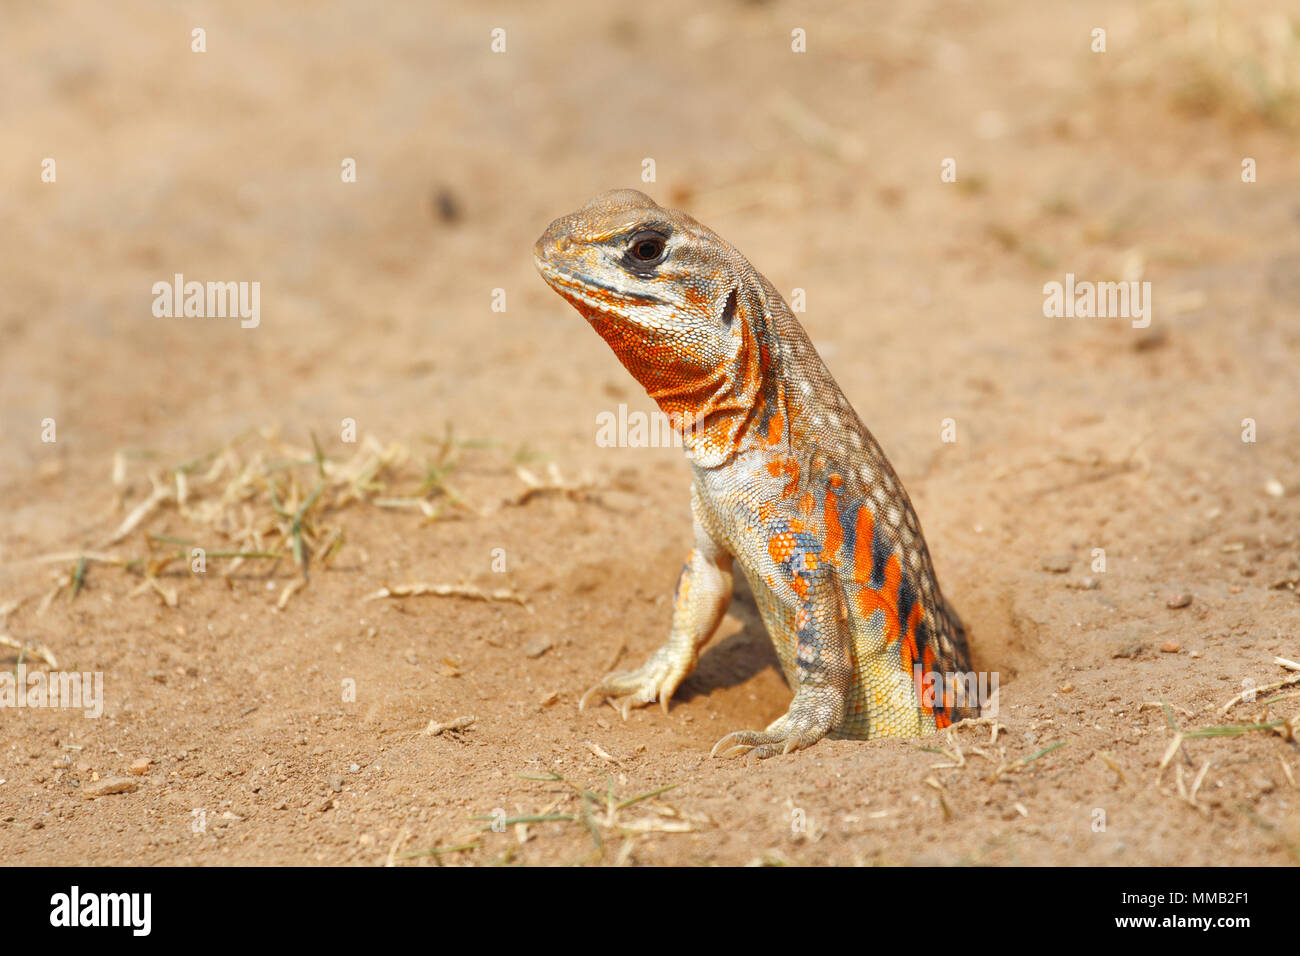 Common butterfly lizard /Butterfly agama (Leiolepis belliana ssp. ocellata) emerge from the burrow Stock Photo